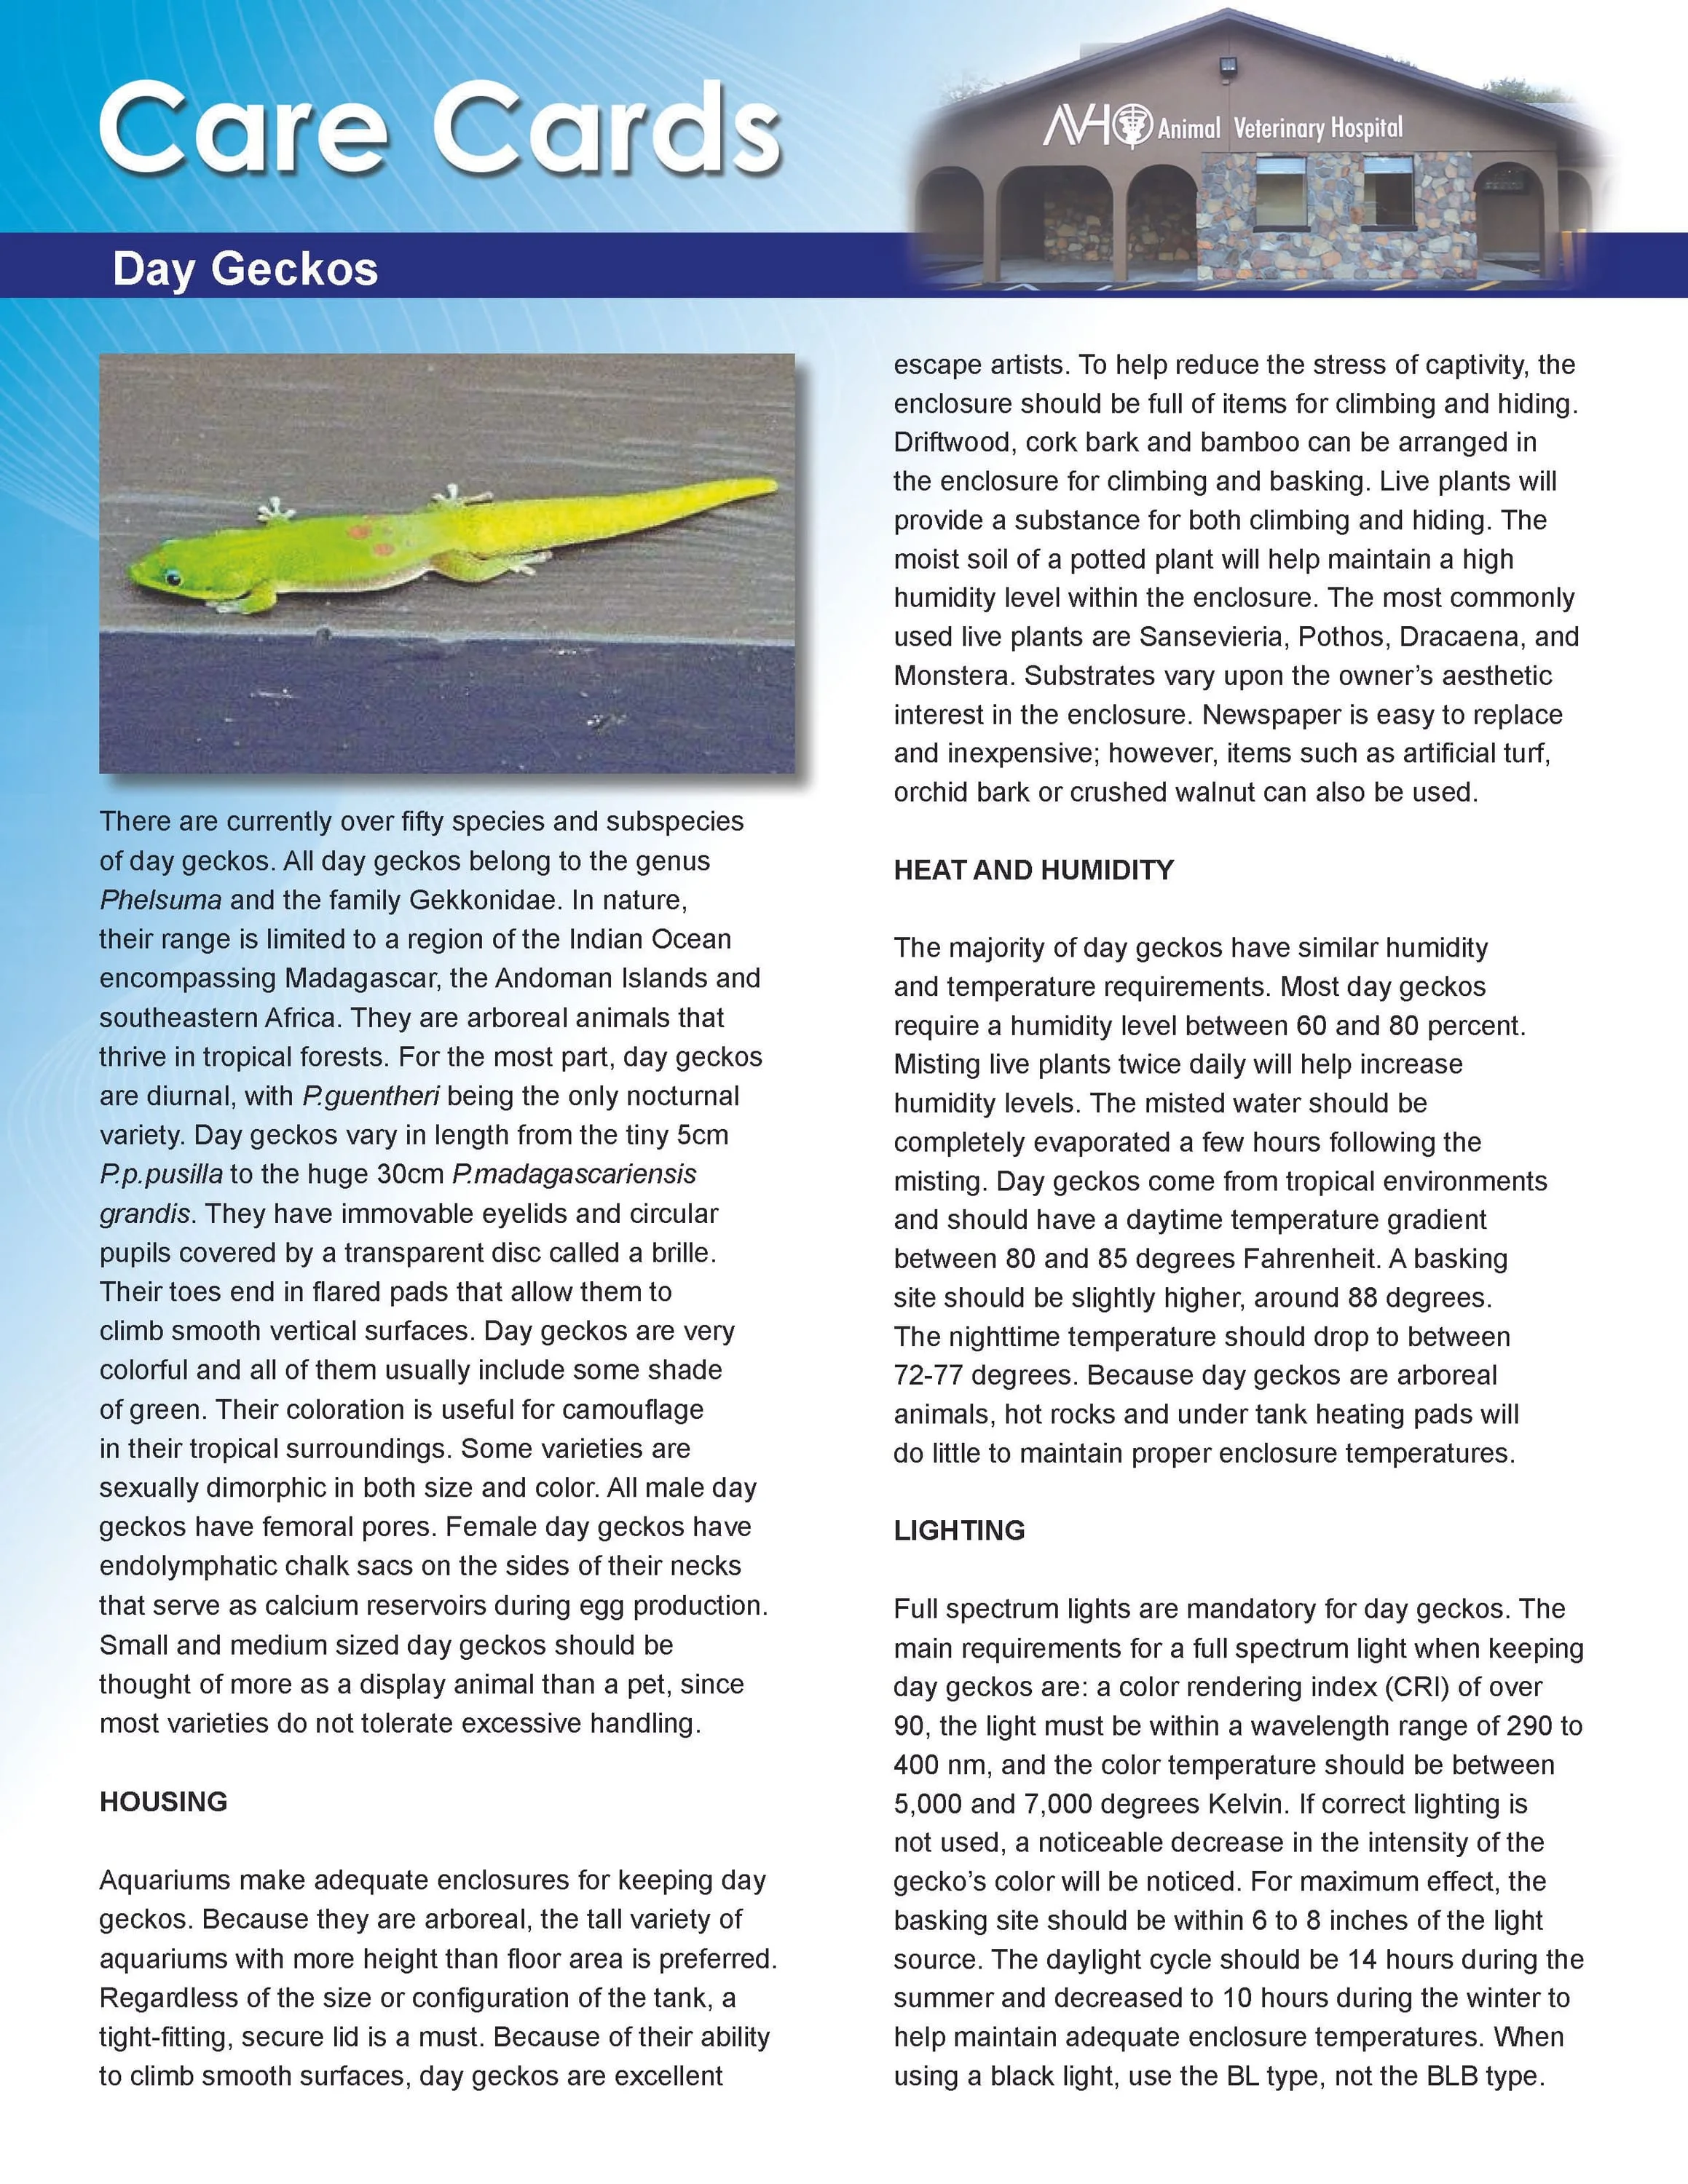 Day Gecko Care Card